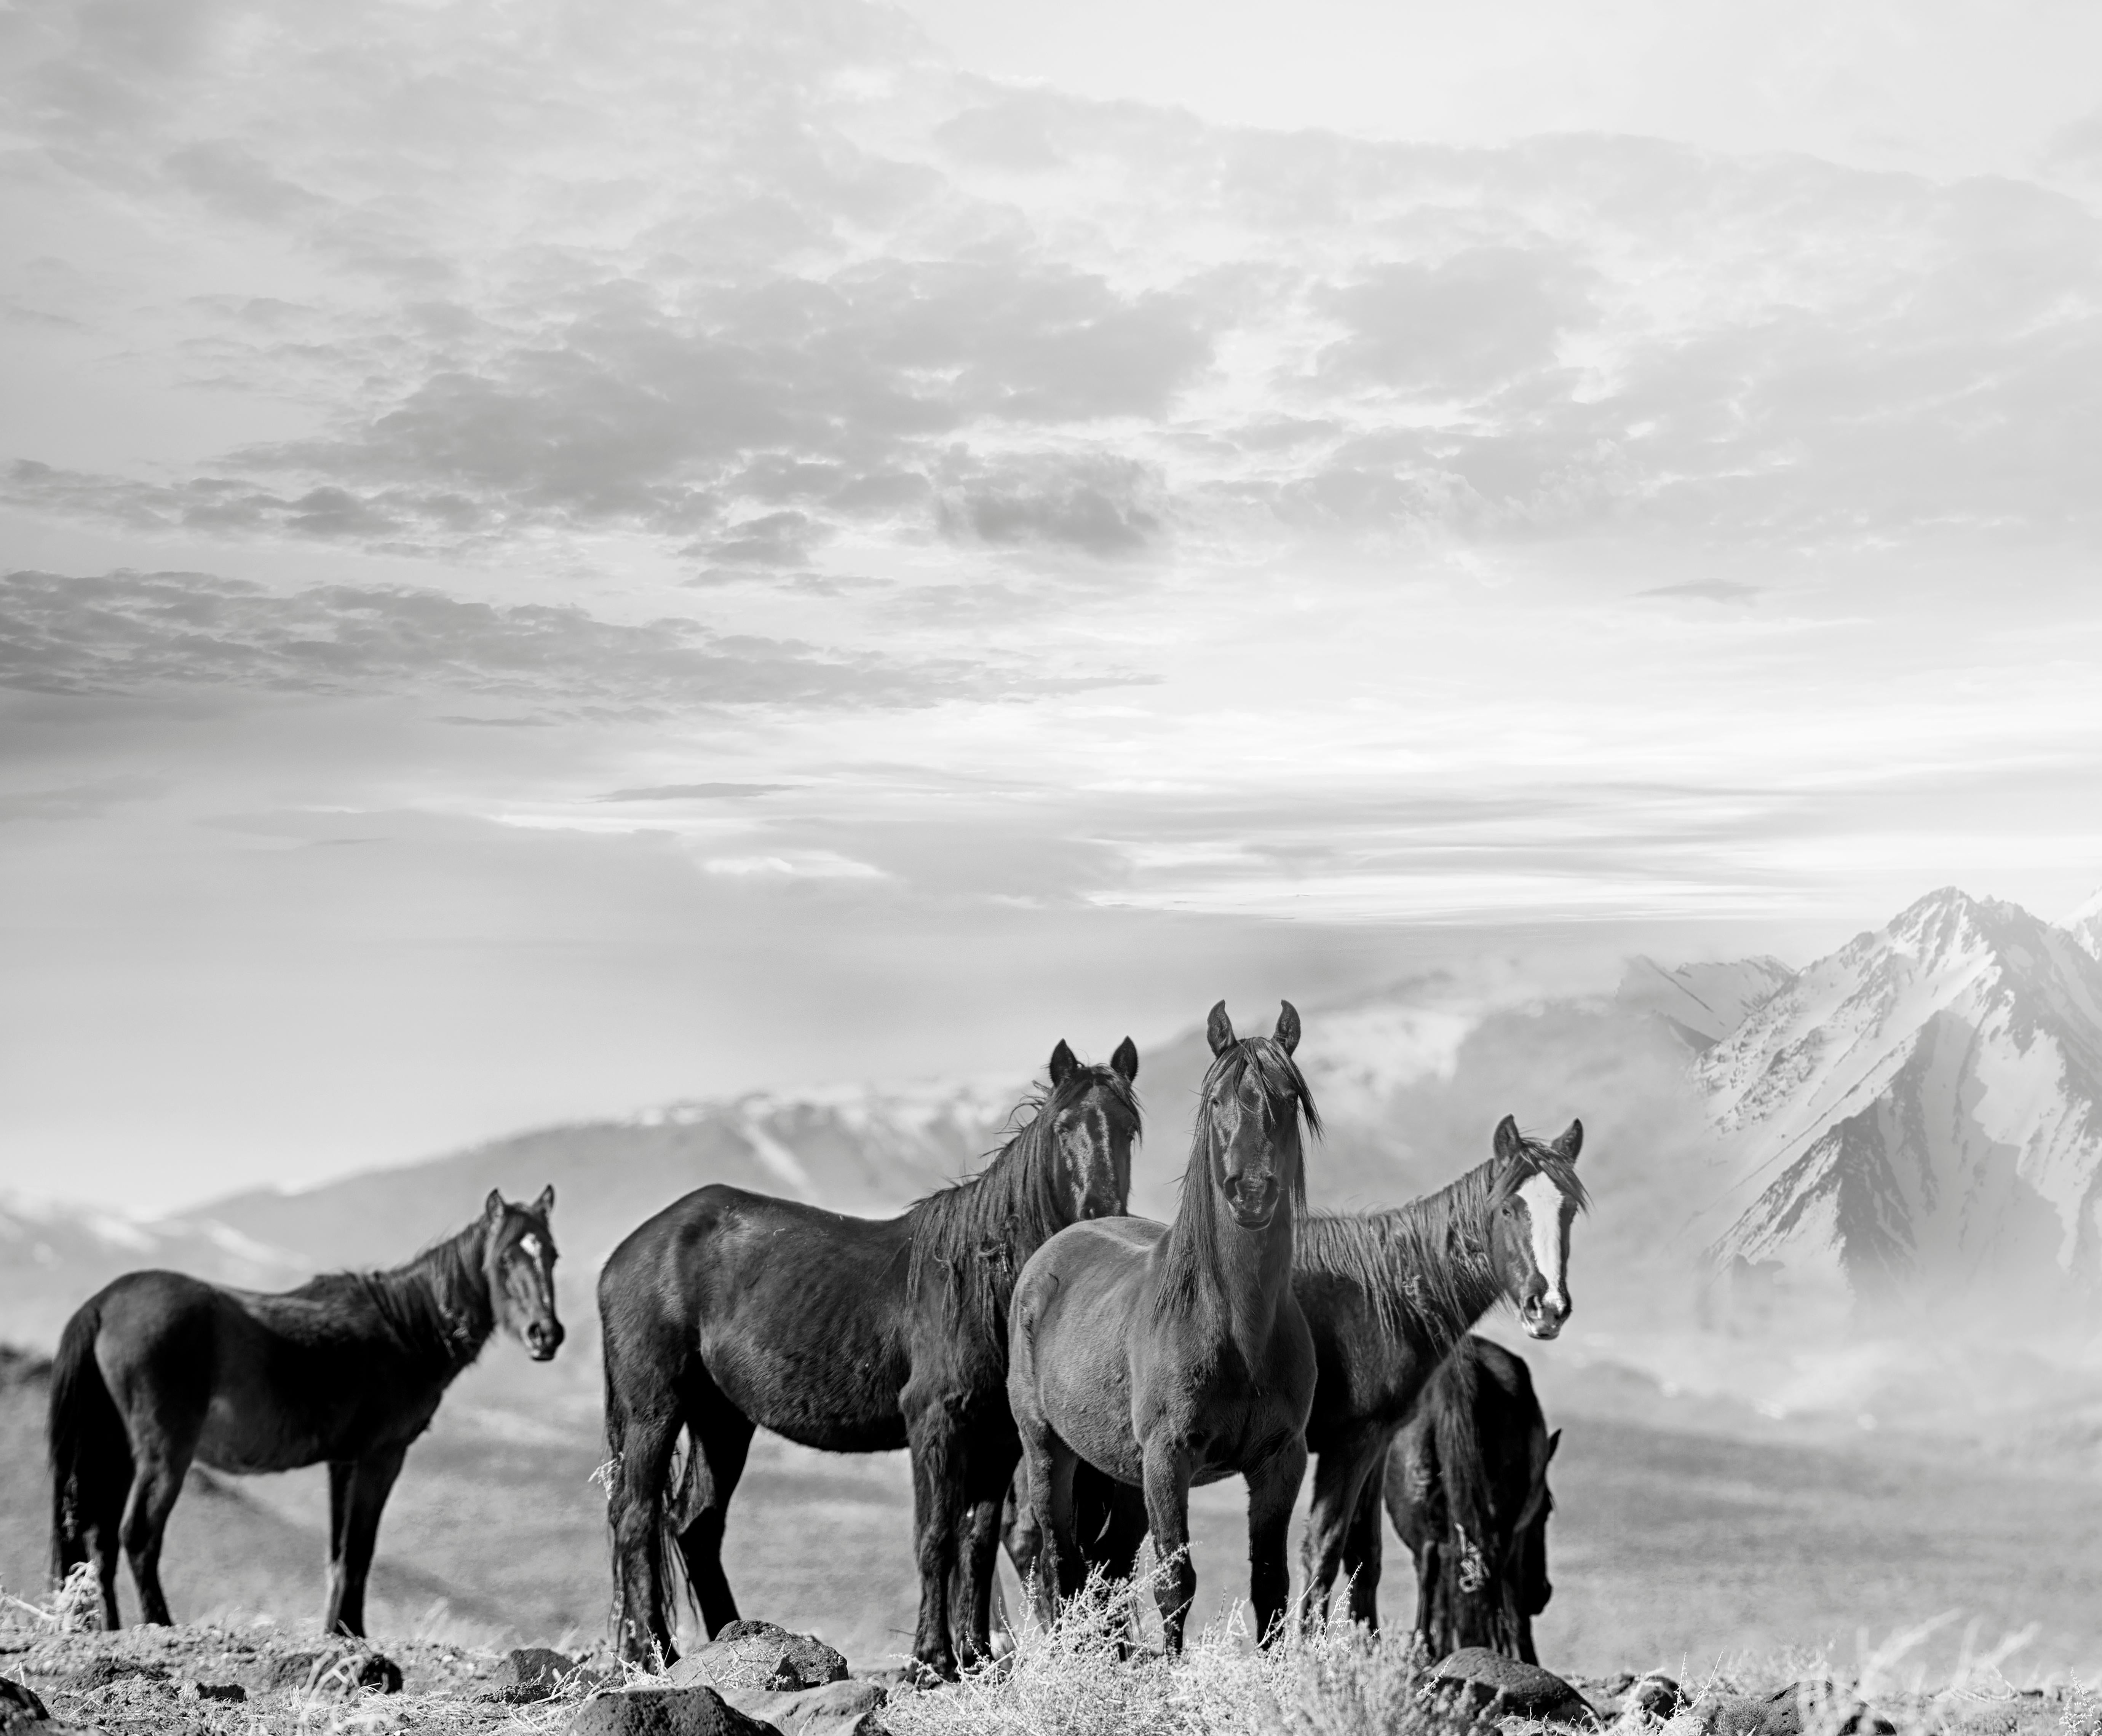 Shane Russeck Animal Print - High Sierra Mustangs 36x48 Black & White Photography Wild Horses, Unsigned